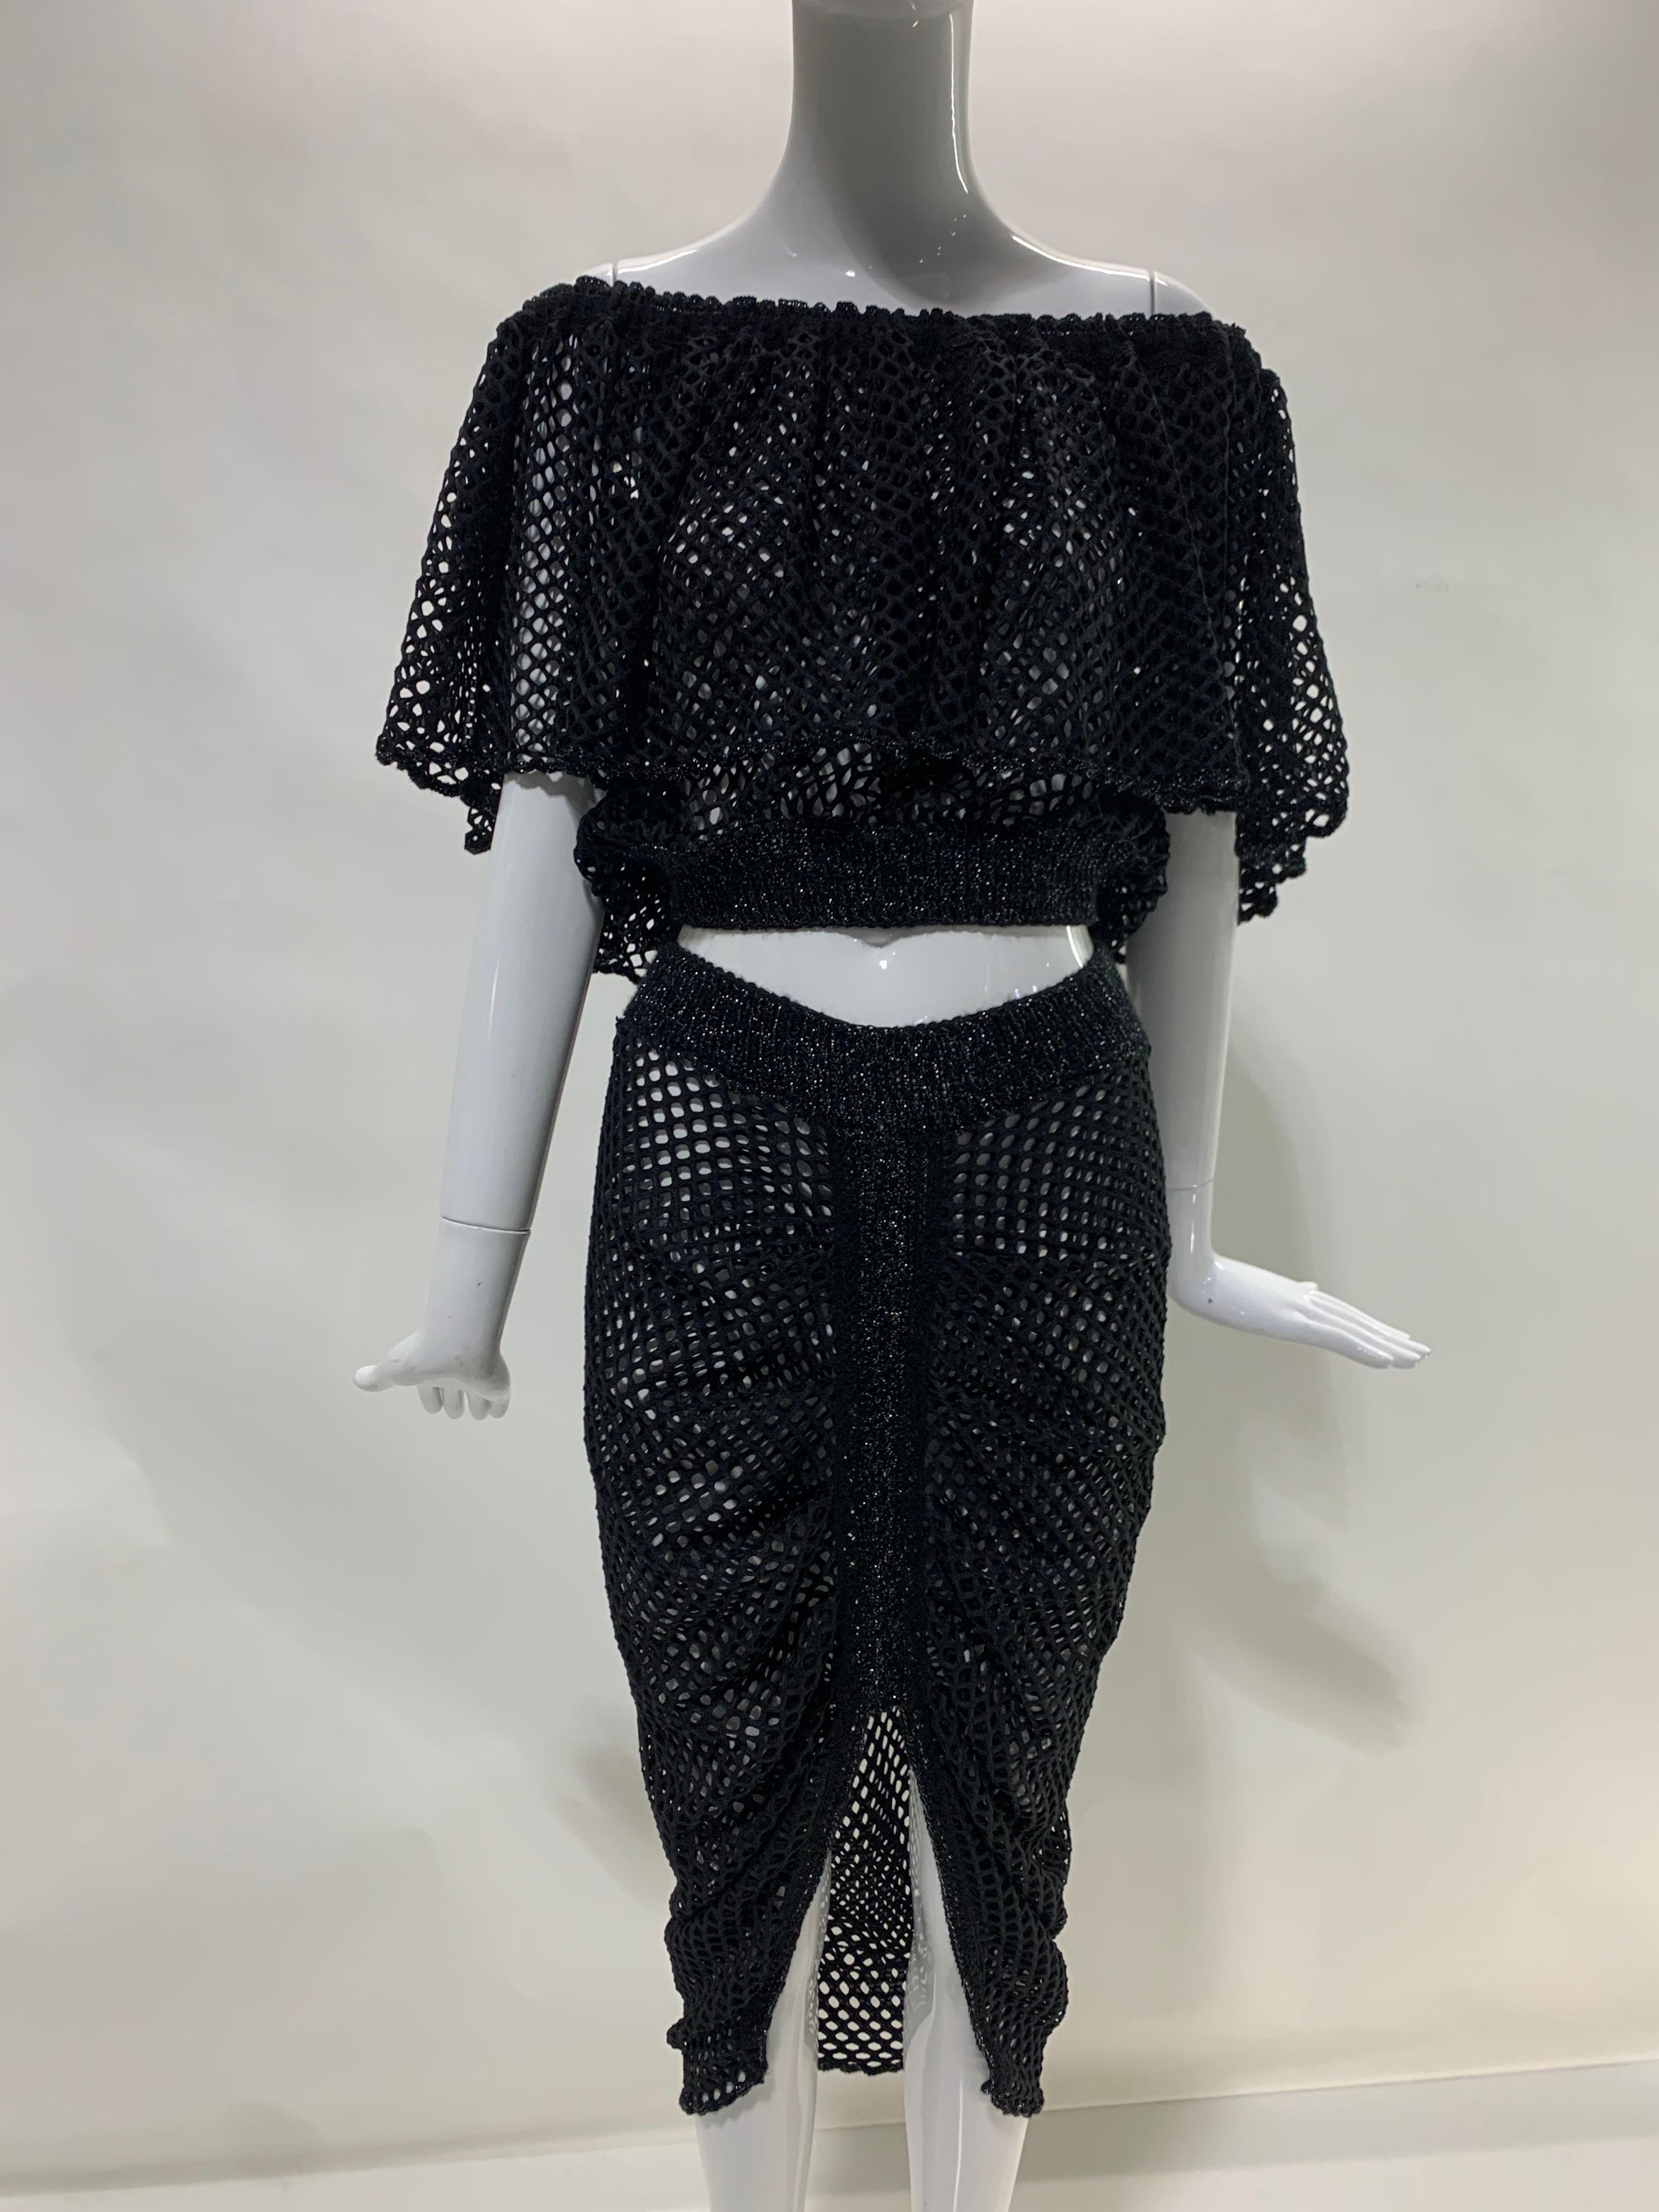 Torso Creations 2-Piece black fishnet ensemble: Off-the-shoulder blouse with gathered elasticized neckline and trimmed with black metallic lurex knit. Skirt is ruched down center front and has a rib-knit waistband is trimmed in black metallic lurex